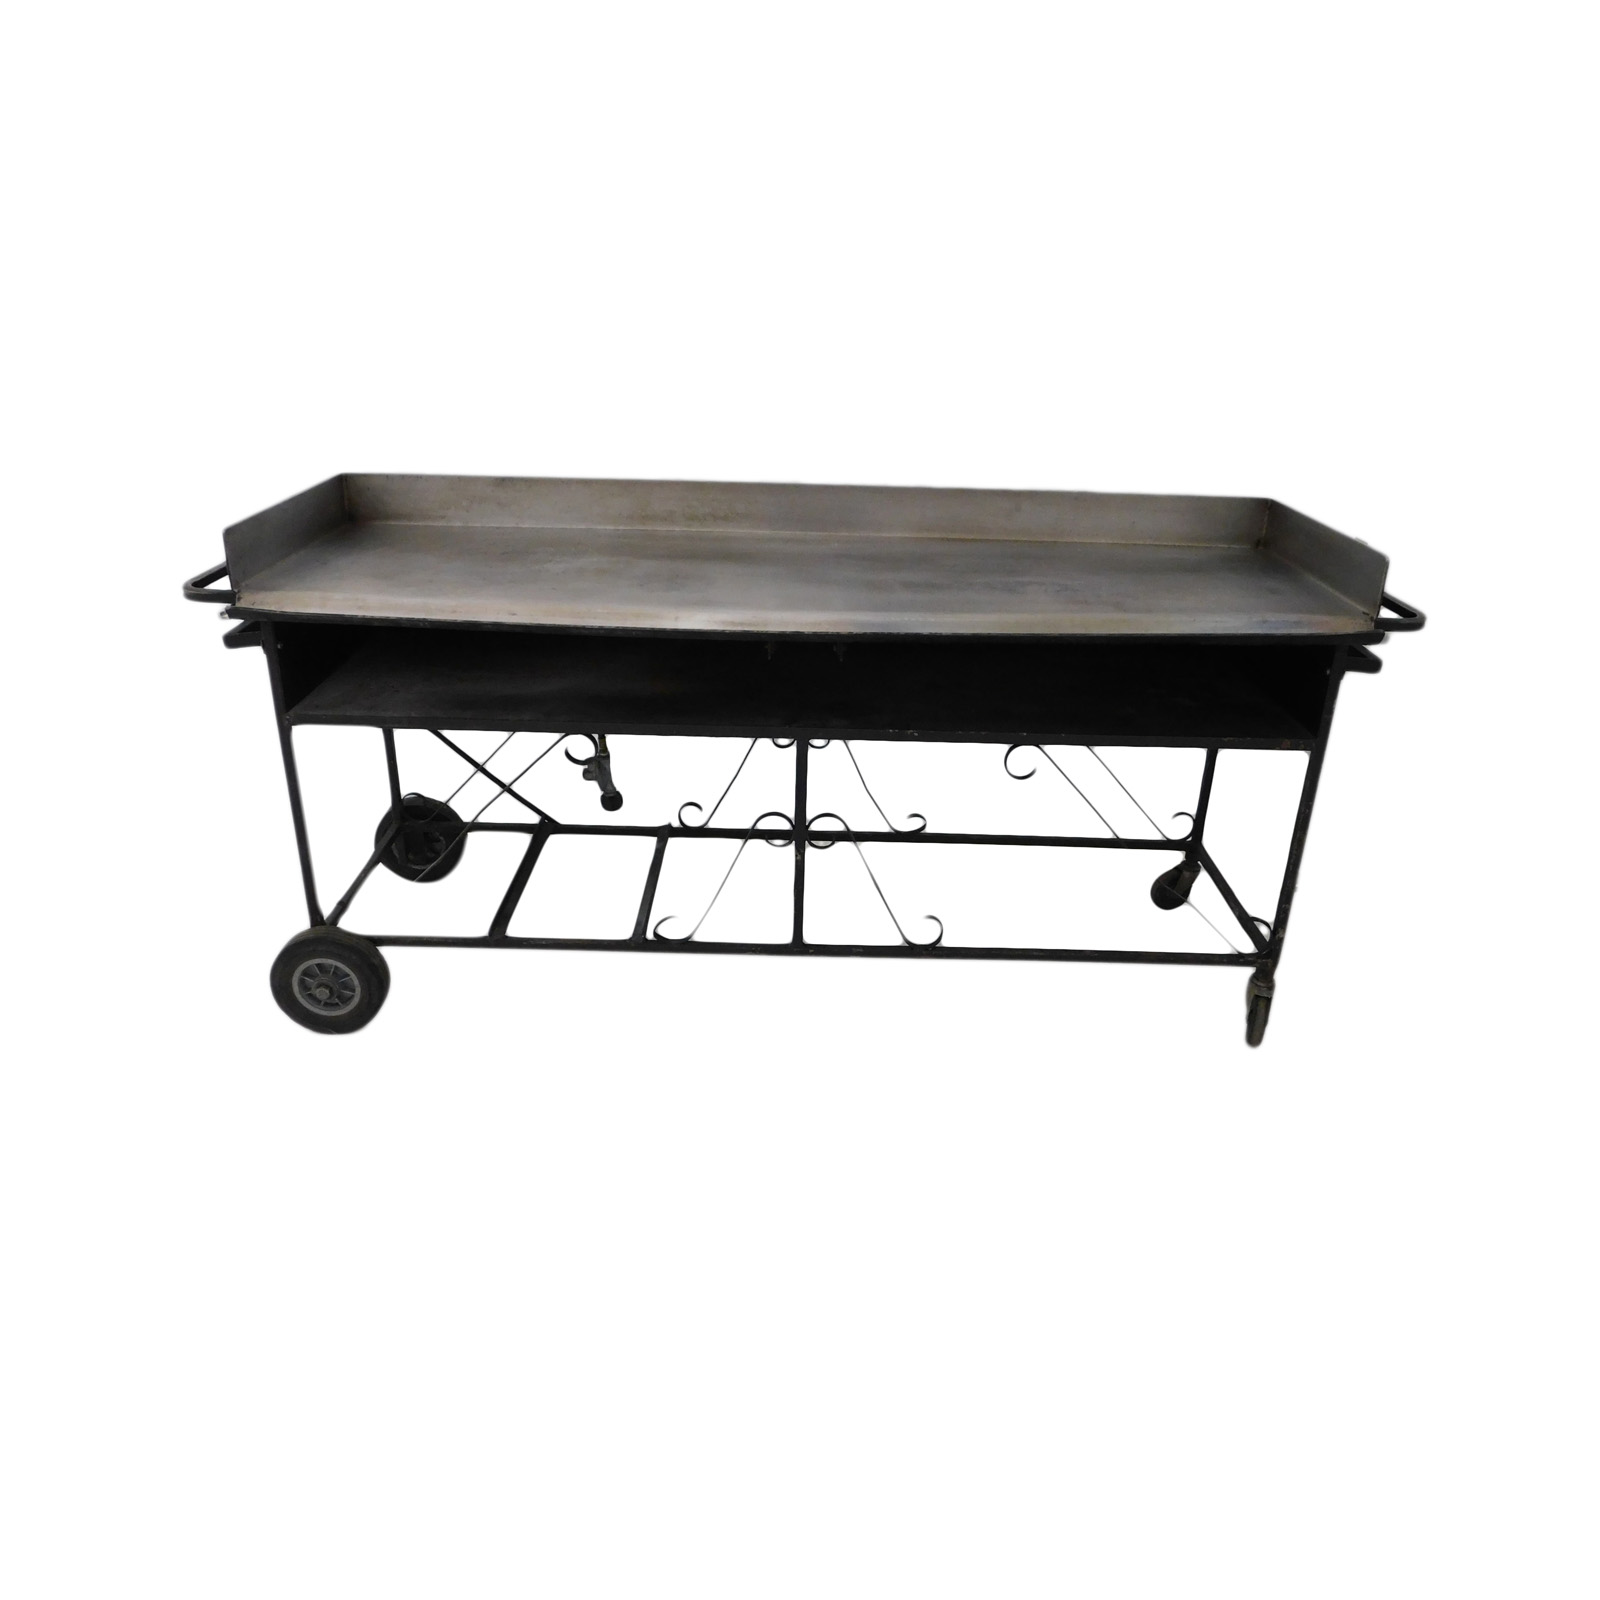 Small Propane Griddle Rental with Food Pans